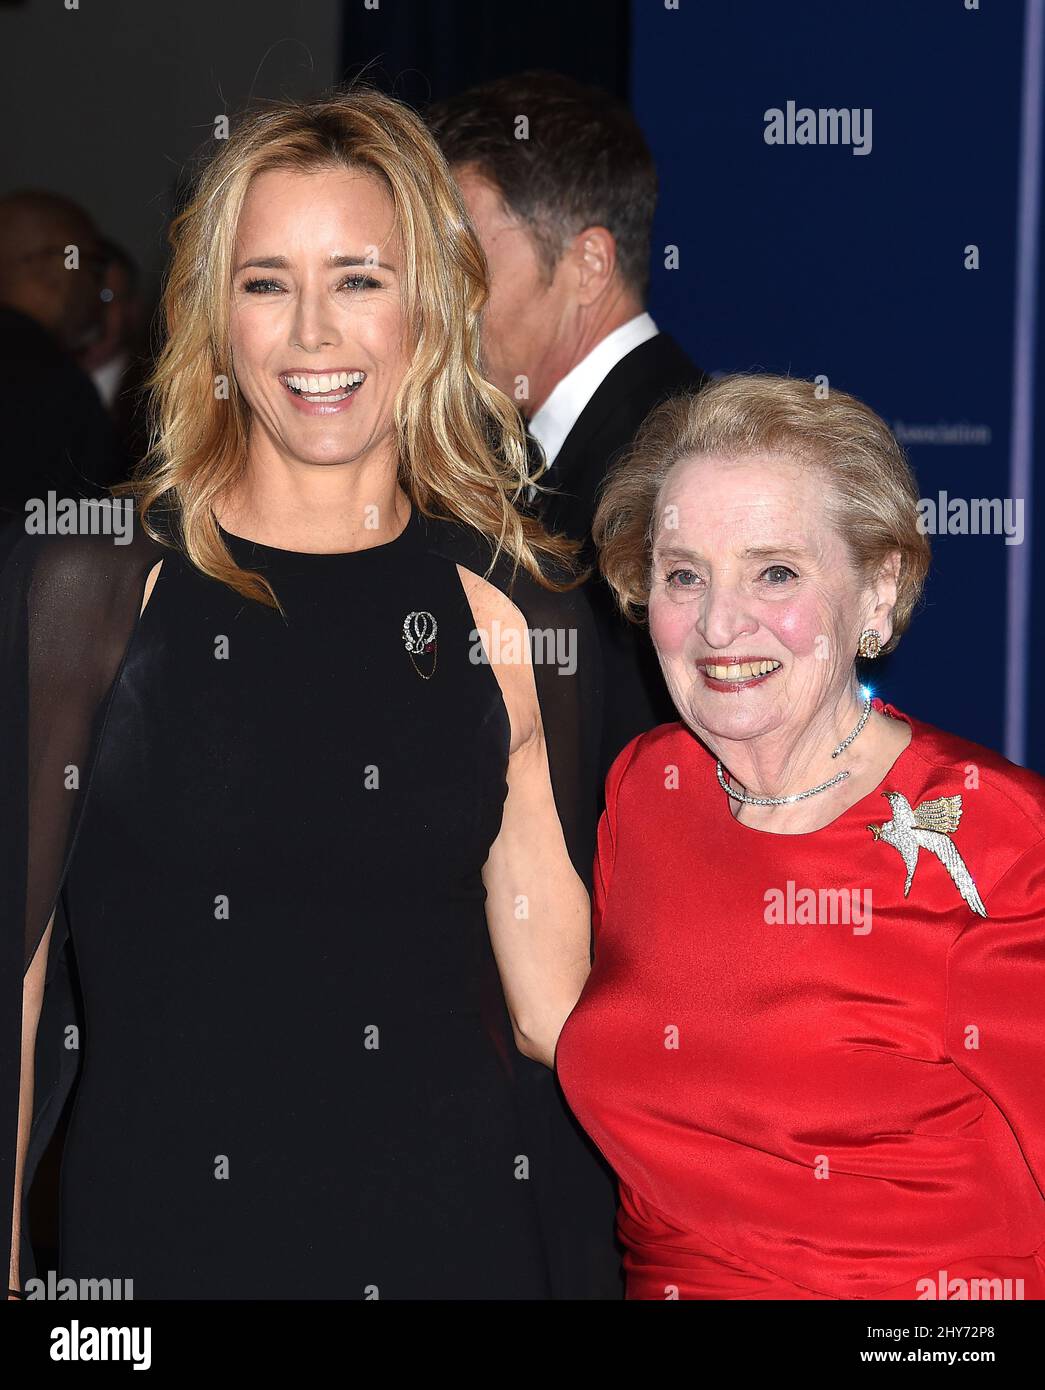 Tea Leoni and Madeleine Albright attends the White House Correspondents Association Dinner 2015 held at the Hilton Hotel. Stock Photo